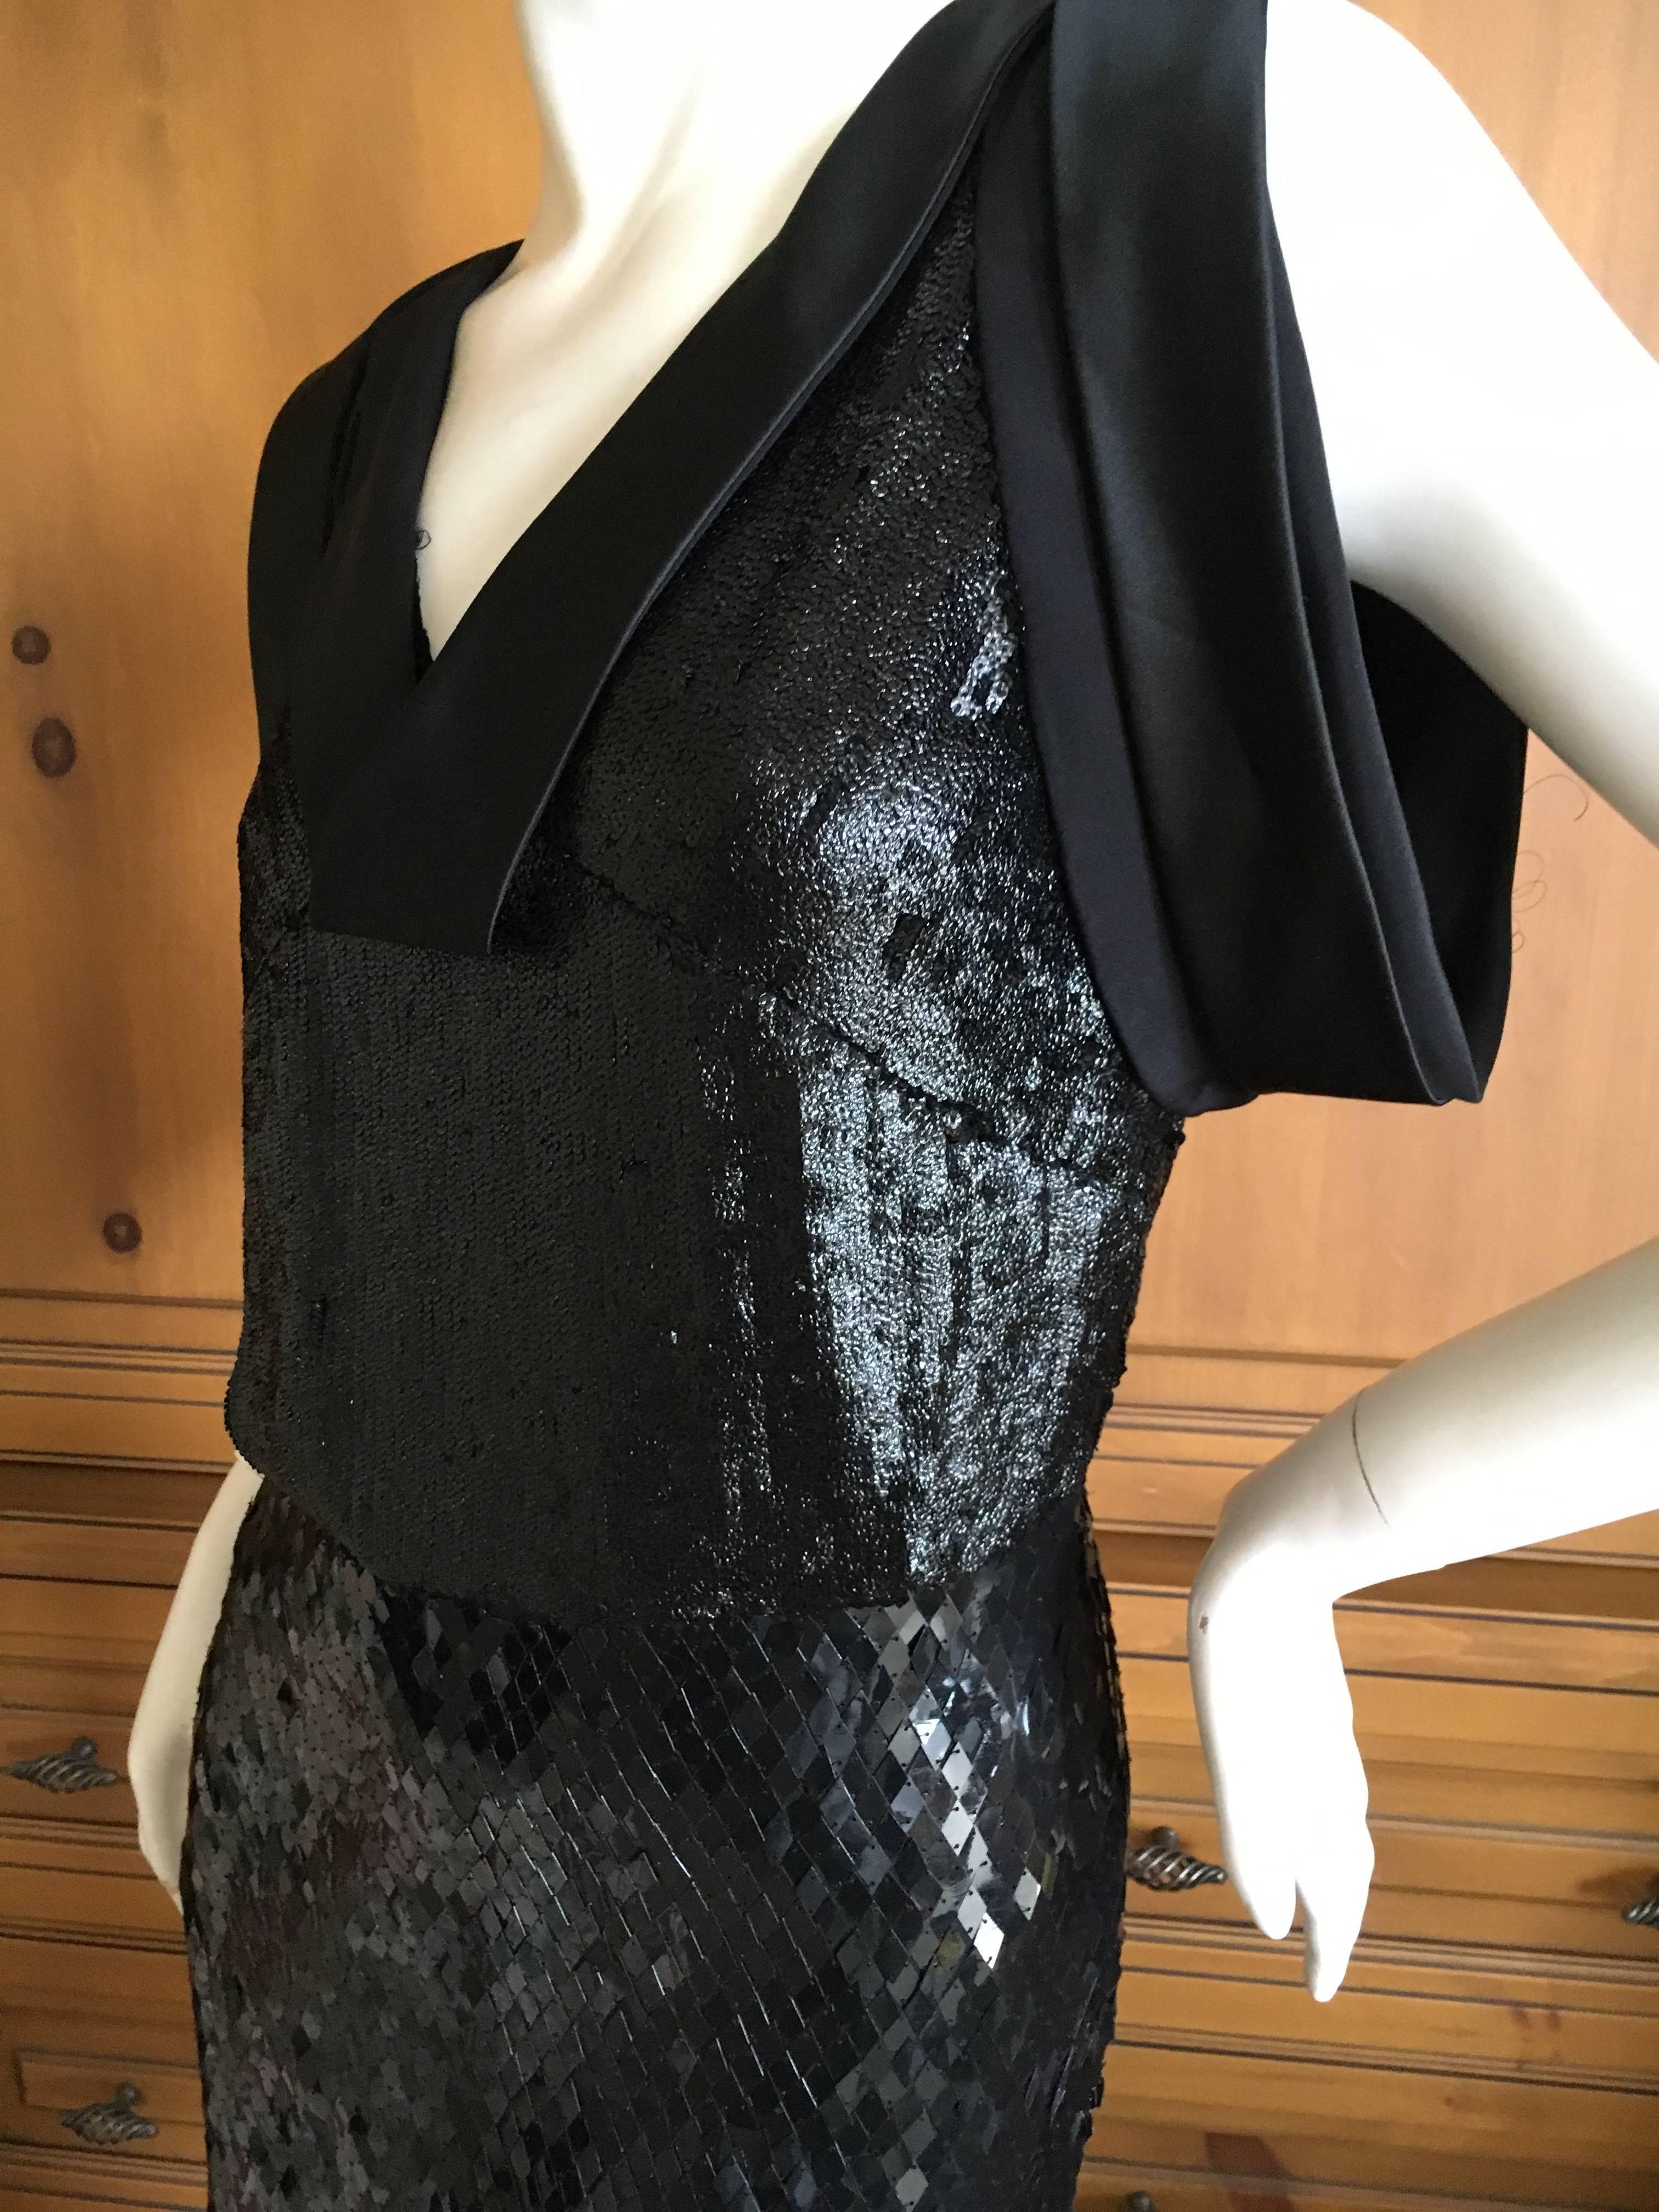 Gucci Litlte Black Dress with Harlequin Pattern Sequins In Excellent Condition For Sale In Cloverdale, CA